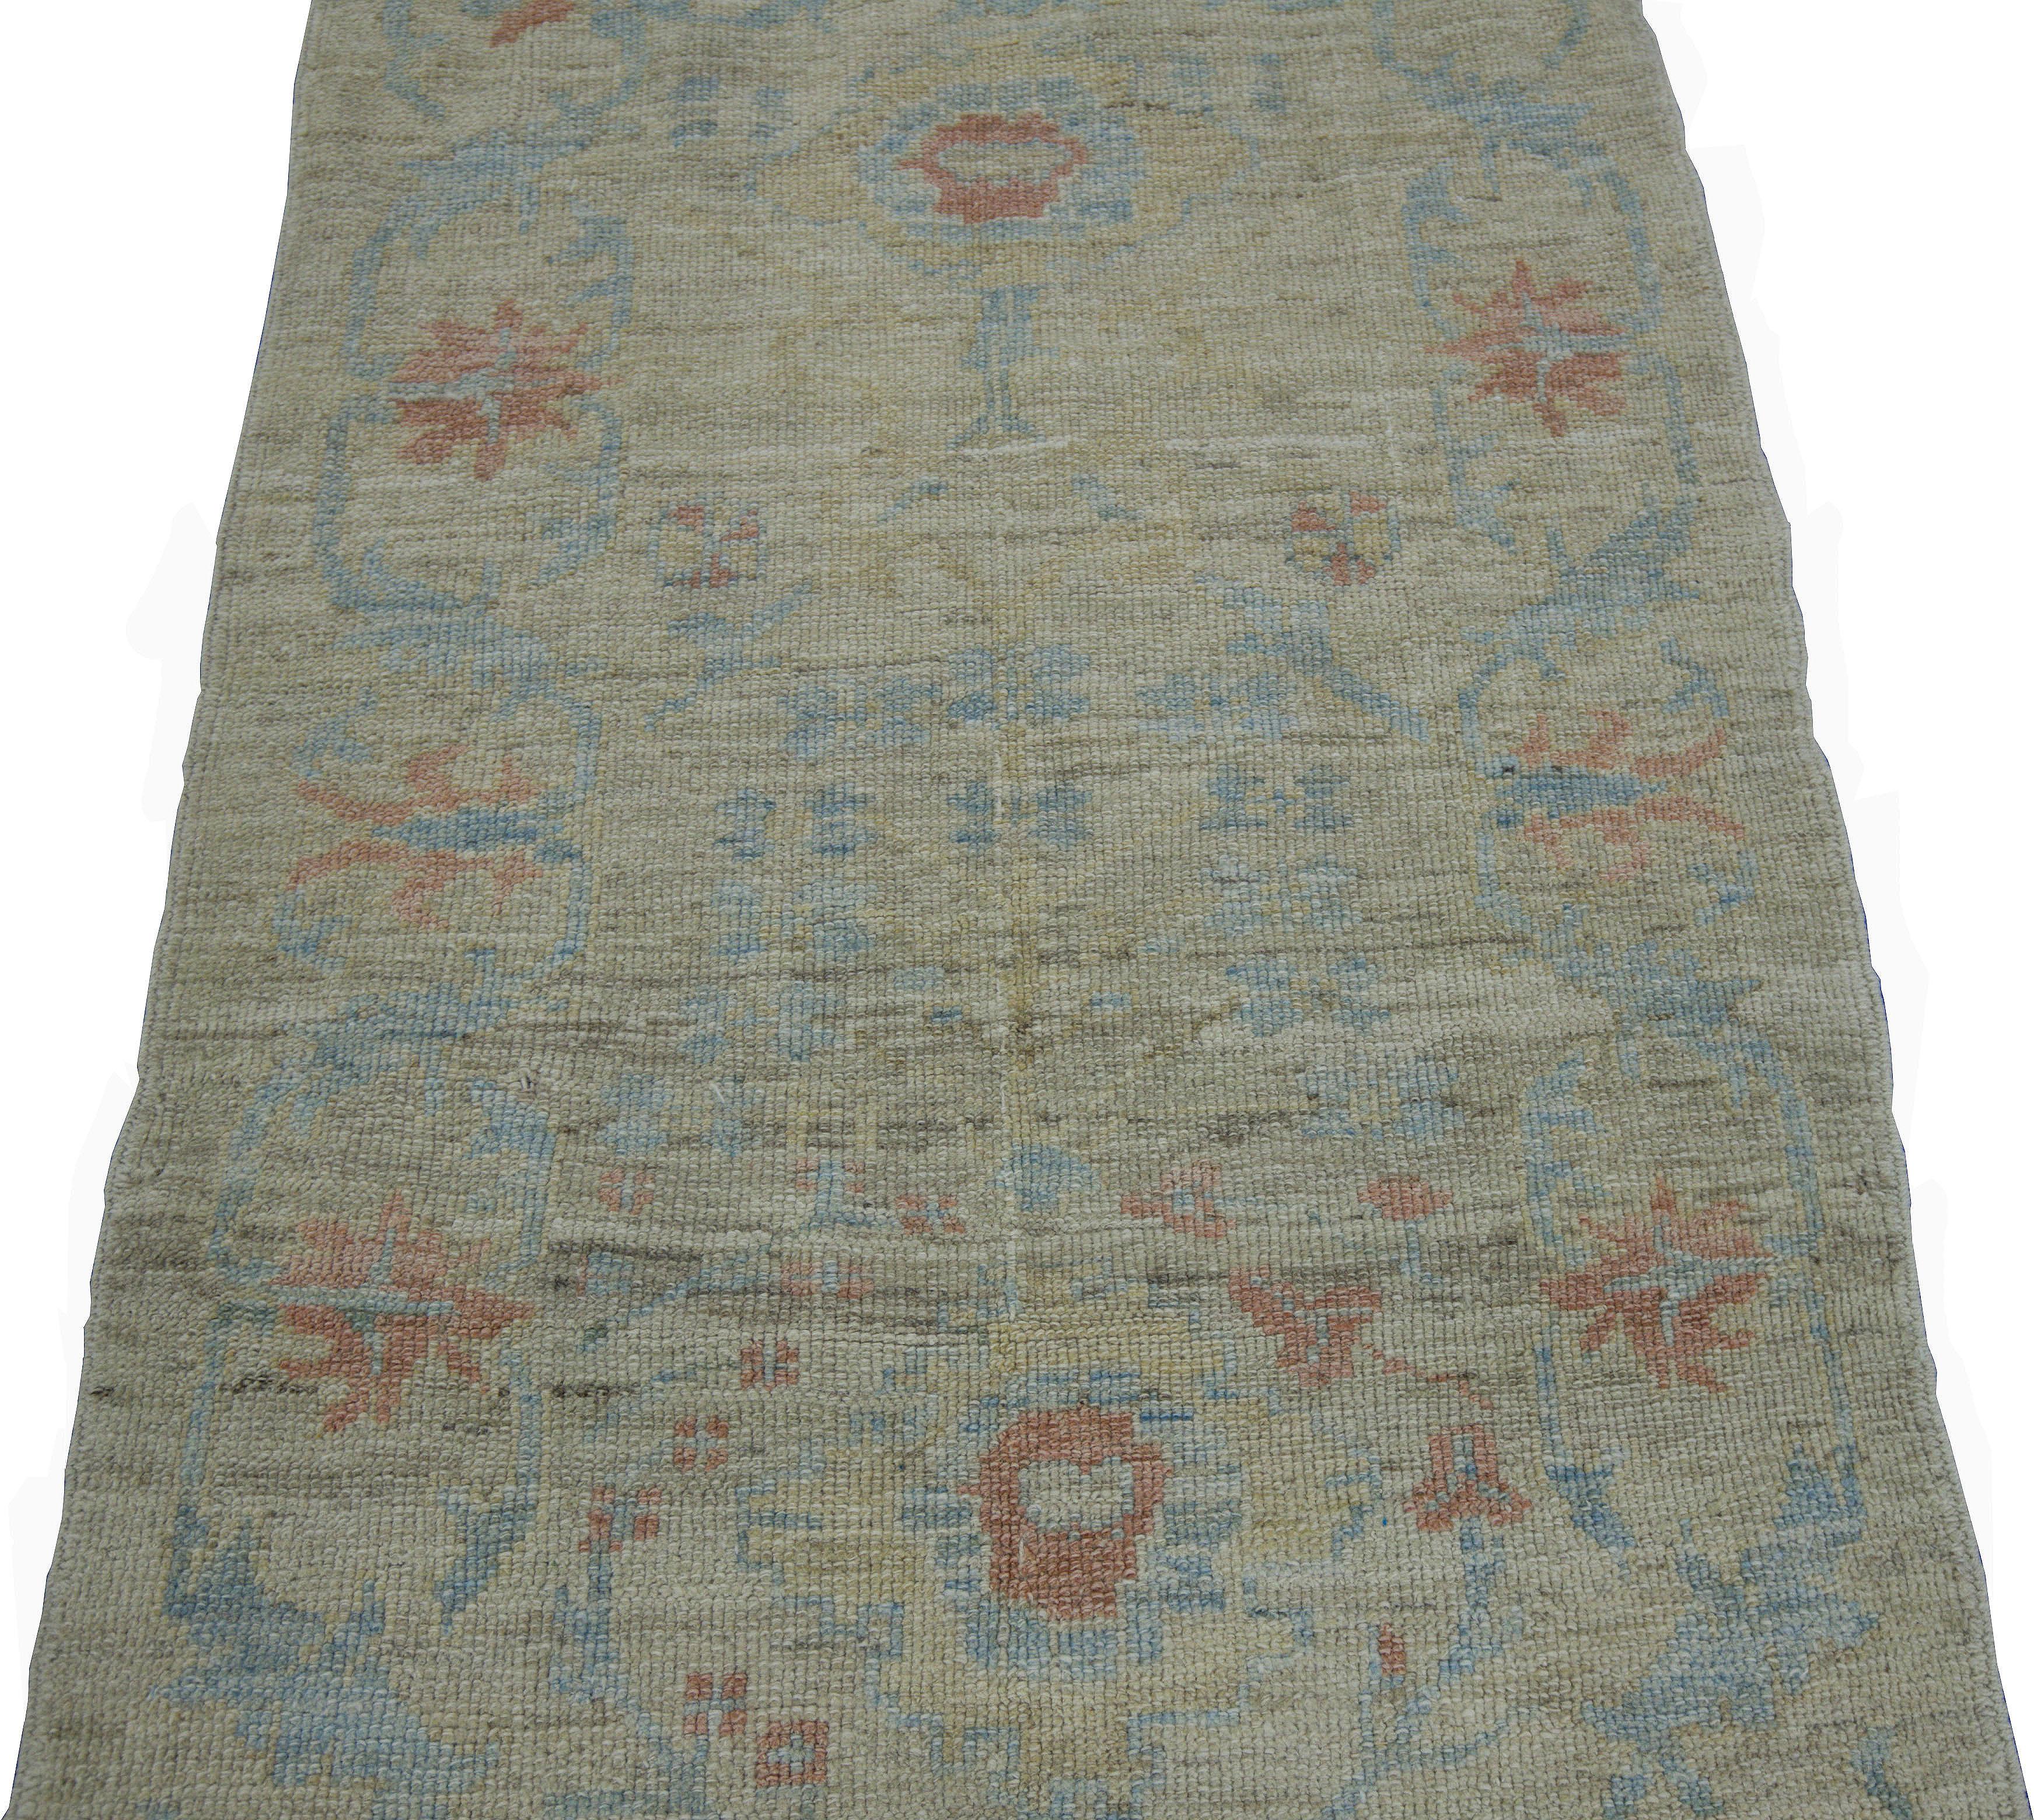 Modern Turkish rug made of handwoven sheep’s wool of the finest quality. It’s colored with organic vegetable dyes that are certified safe for humans and pets alike. It features a beige field with no border but covered in amazing blue and red floral